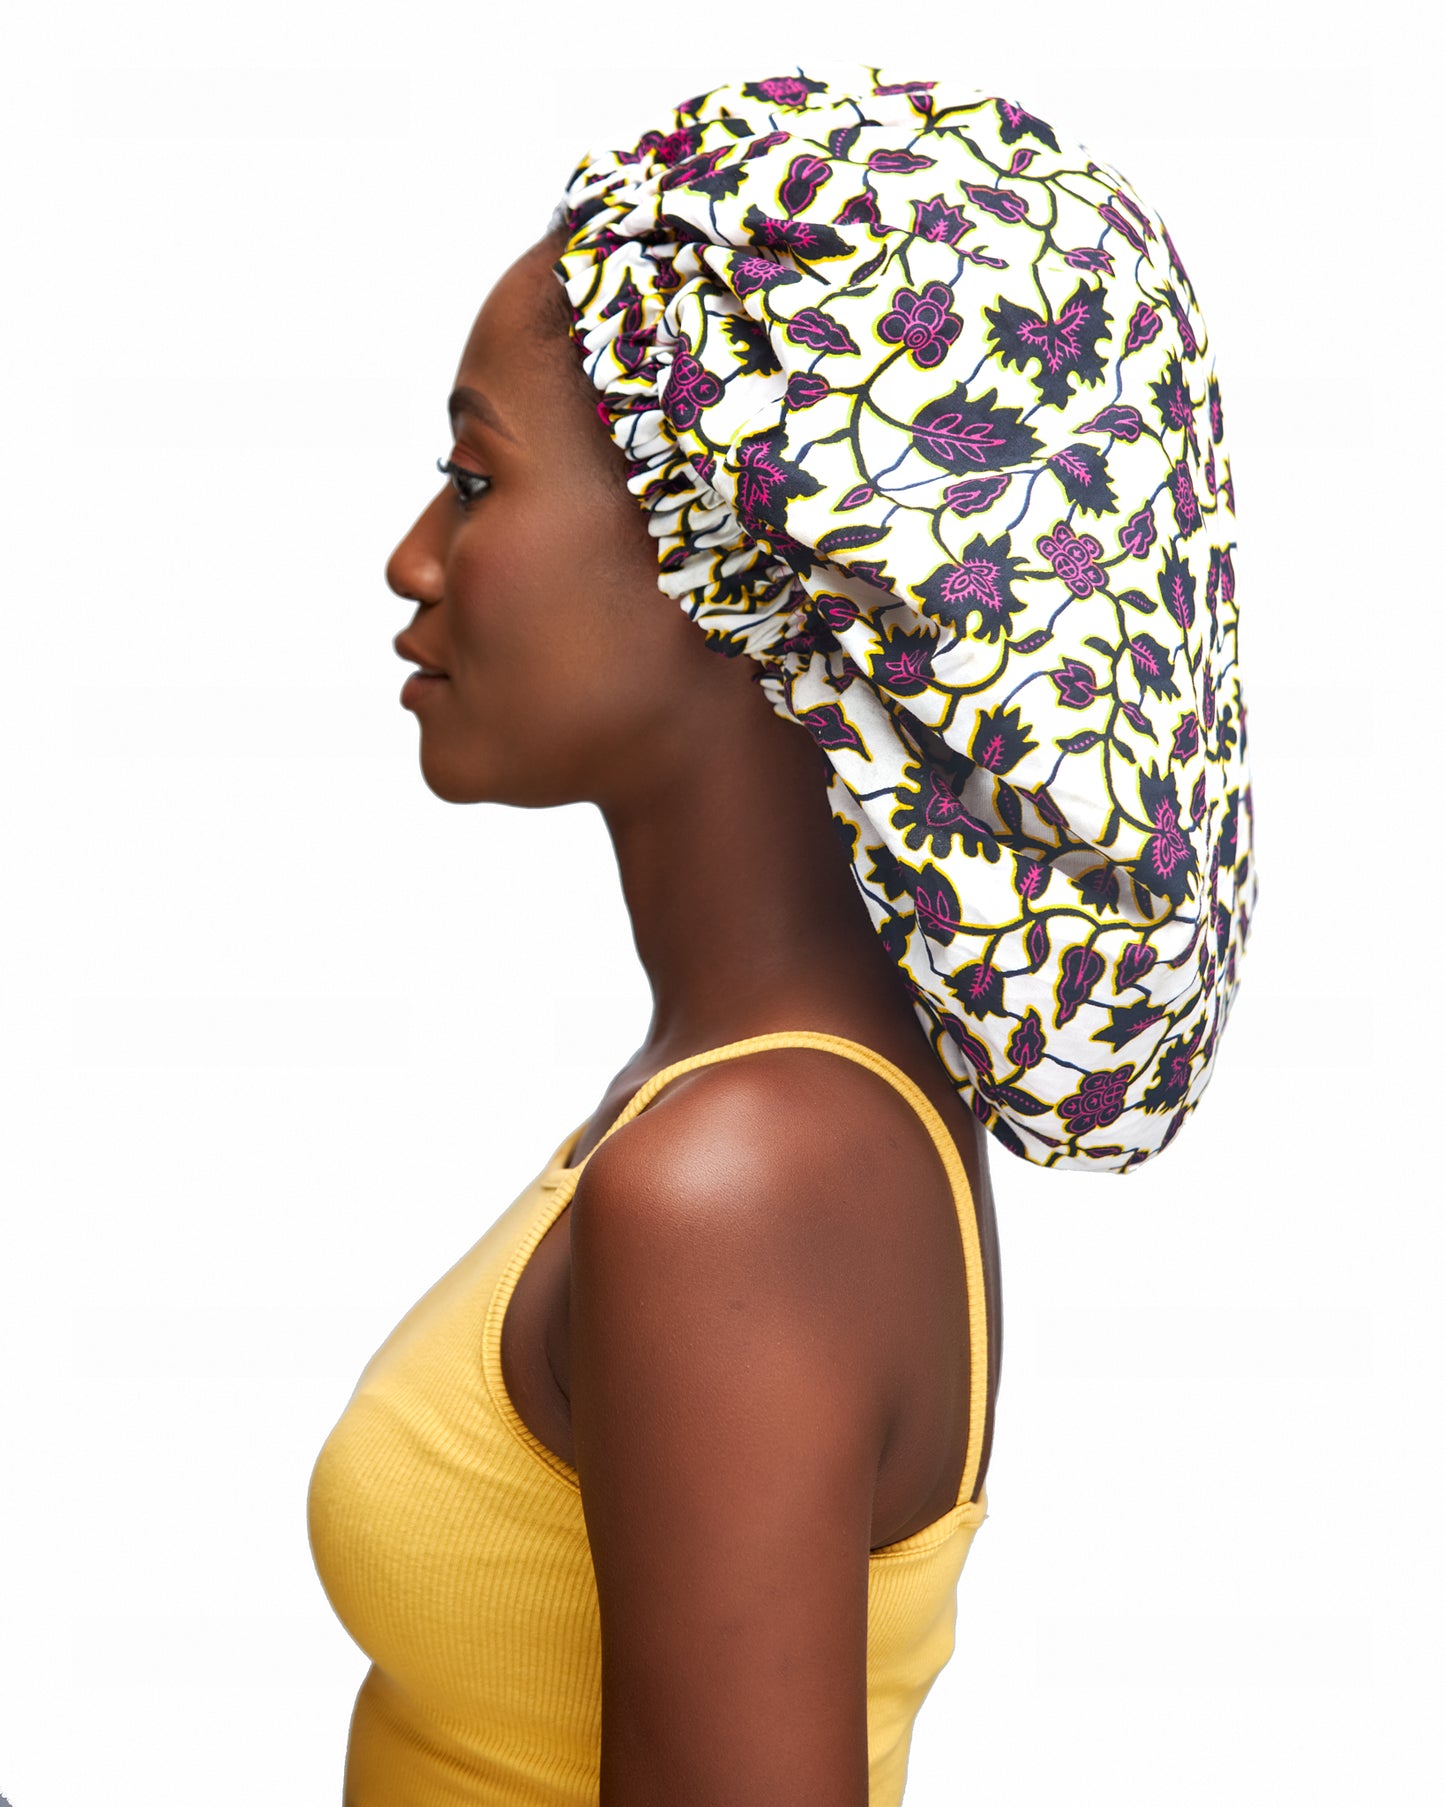 Ankara Wax Print Made of White,Pink Gold And Black Blend of Beautiful Colours And Pattern, Hand Made Elastic With Pink Silk lined Hair Bonnet